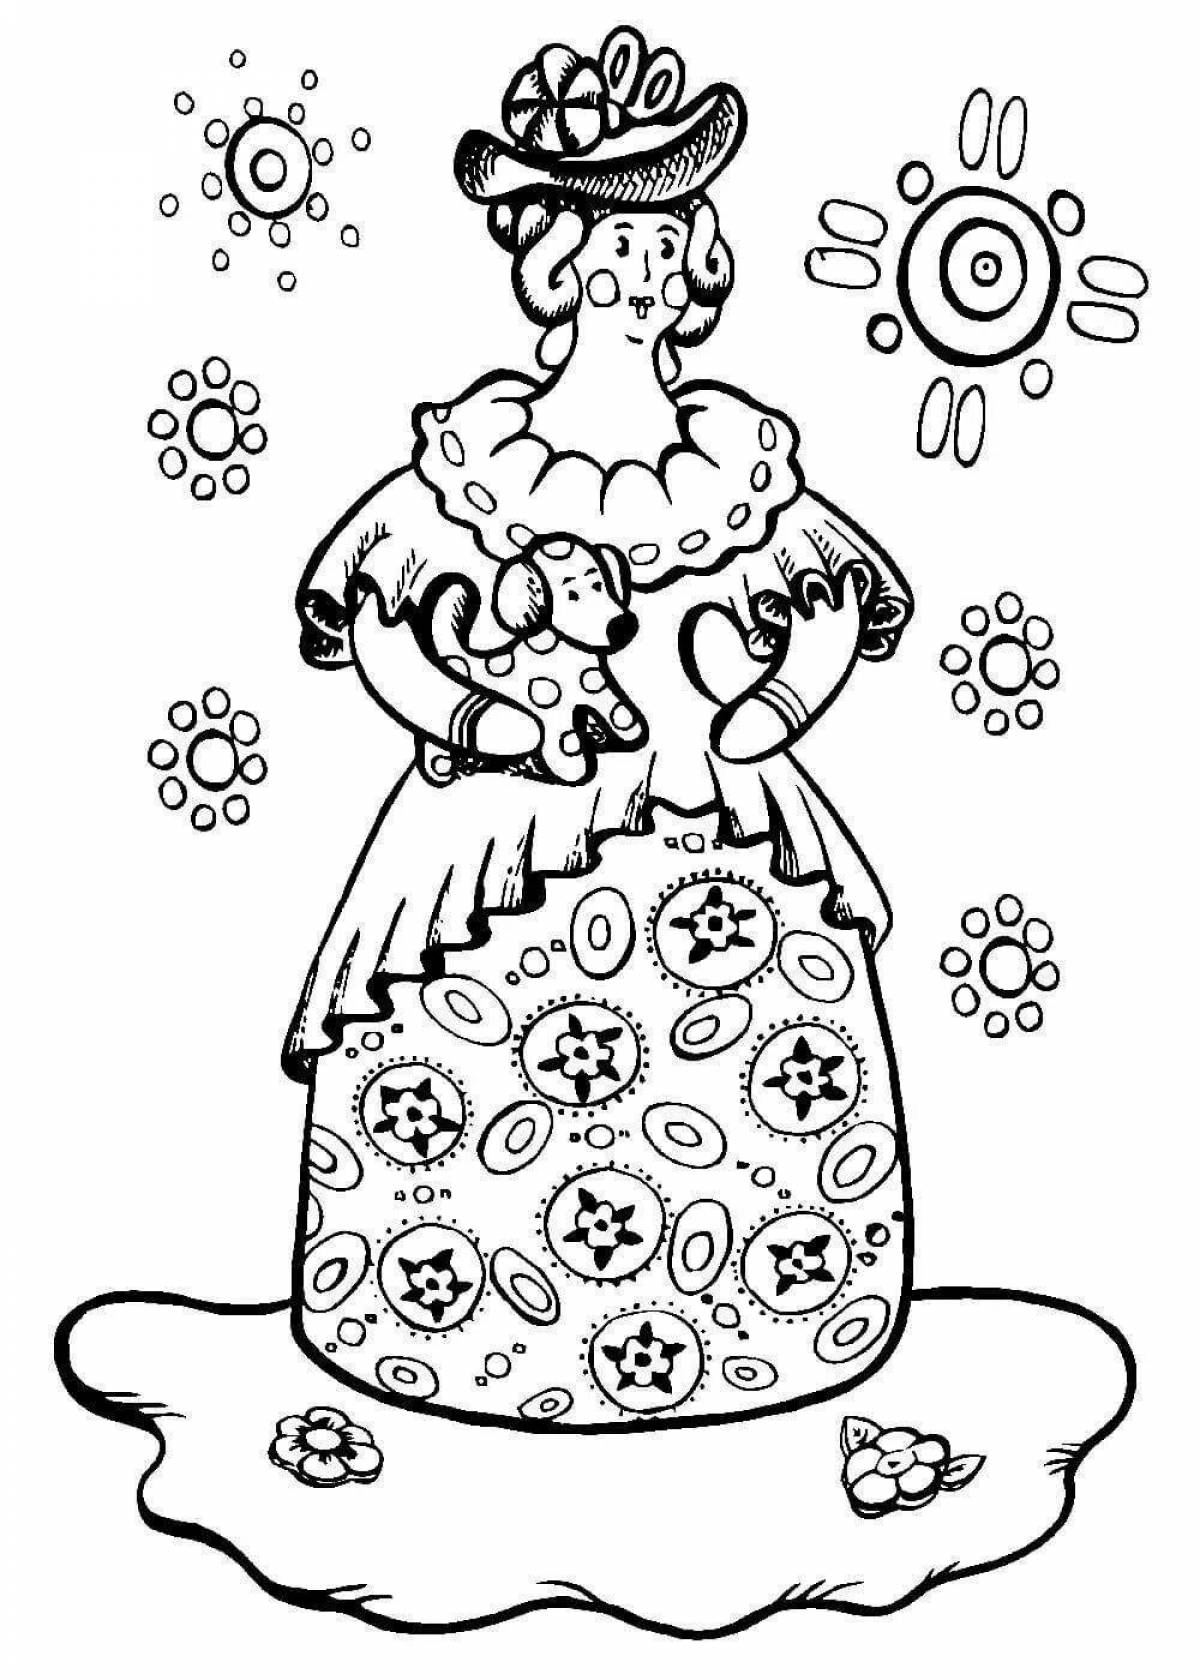 Coloring page charming young lady Dymkovo for children